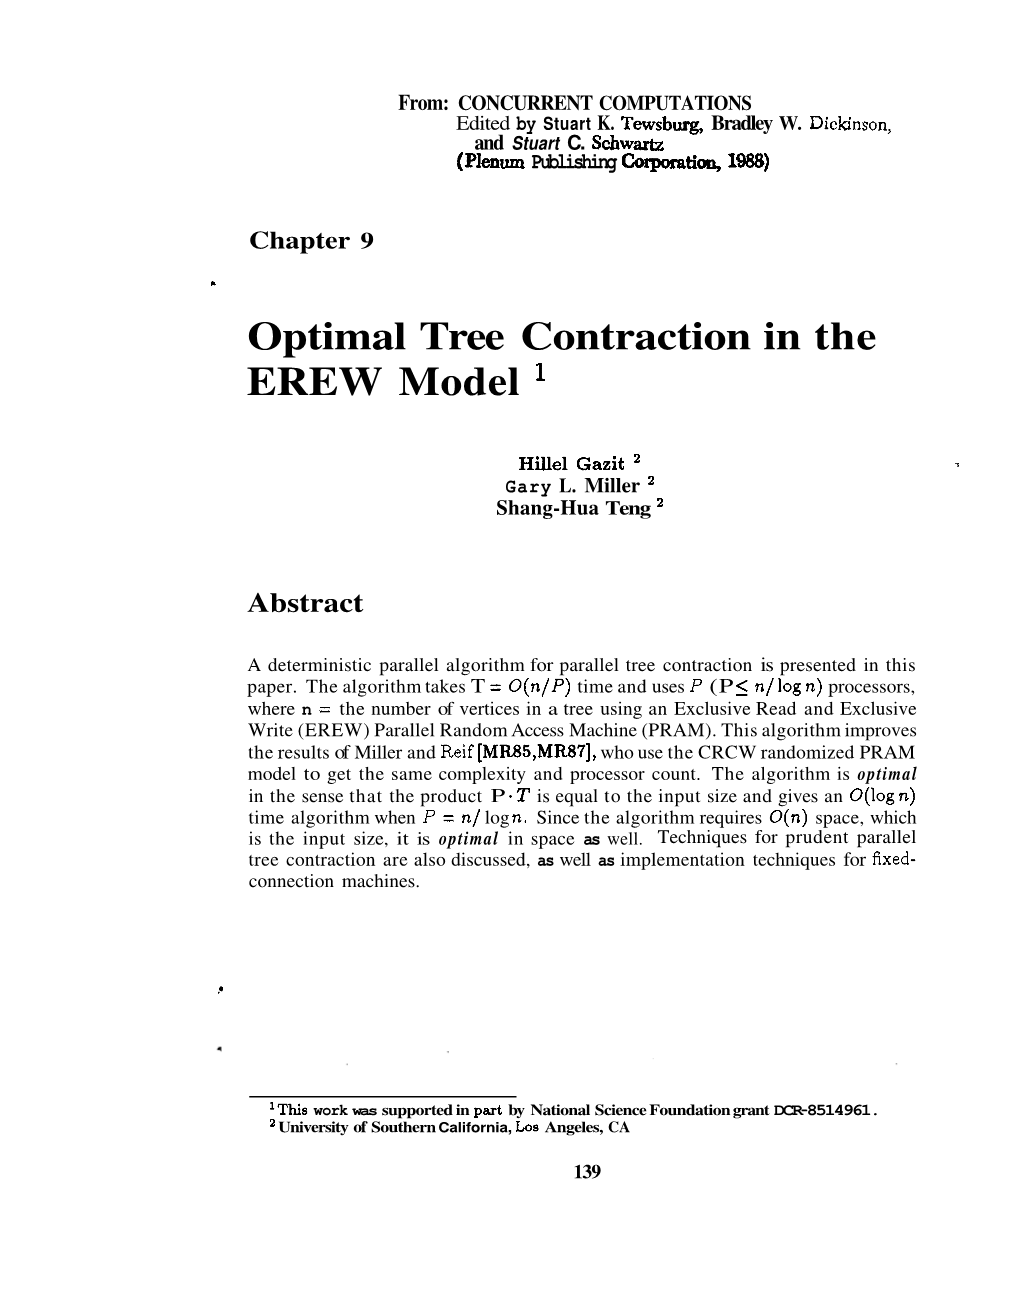 Optimal Tree Contraction in the EREW Model